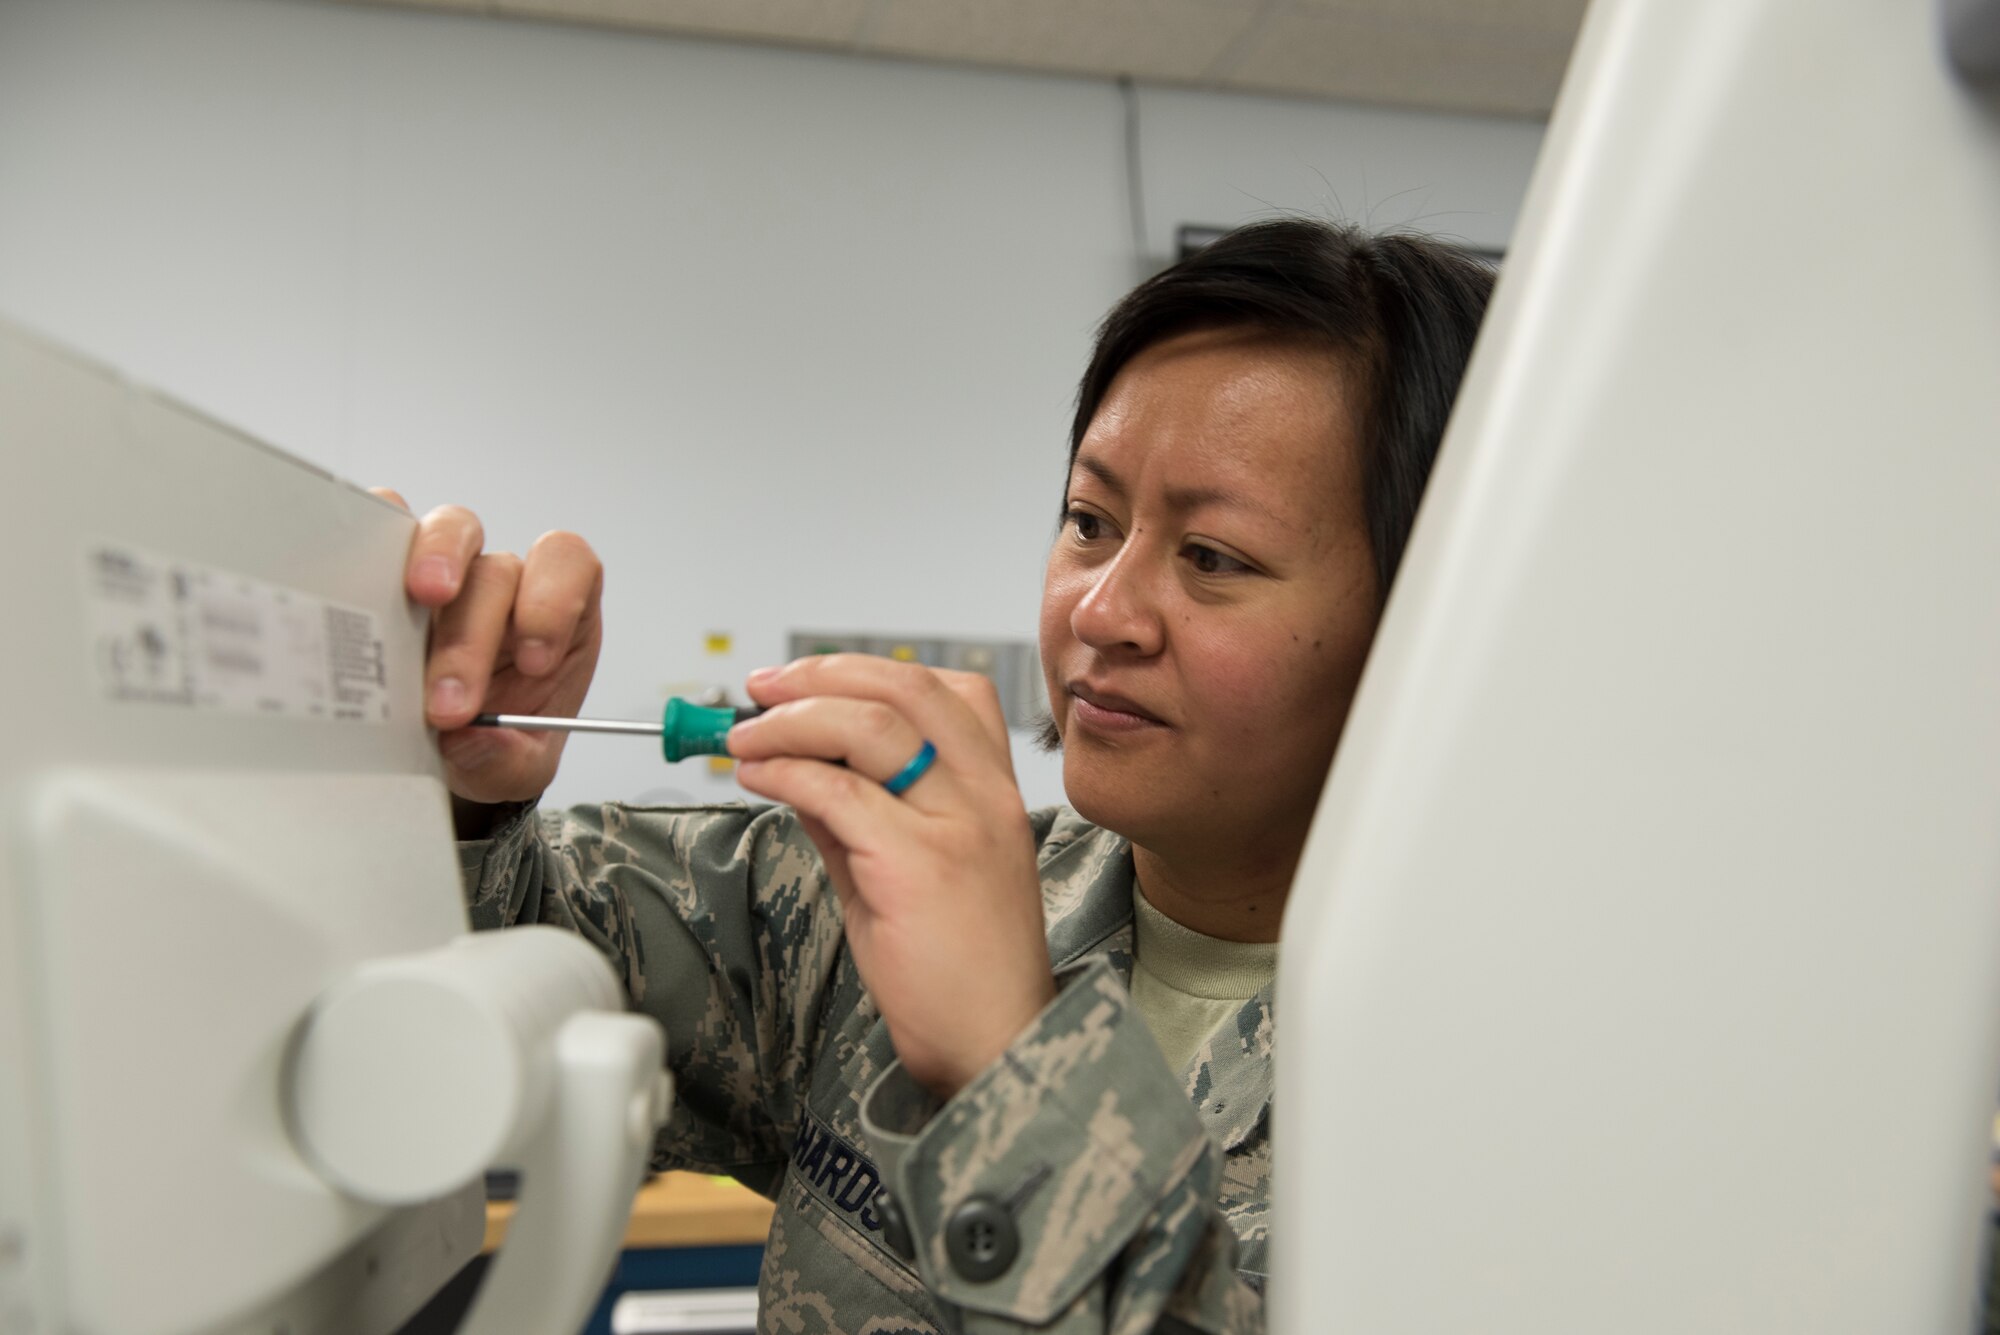 Tech. Sgt. Kristine Richardson, 39th Medical Support Squadron biomedical equipment NCO in charge, fixes the screen on an X-ray machine March 29, 2019, at Incirlik Air Base, Turkey.